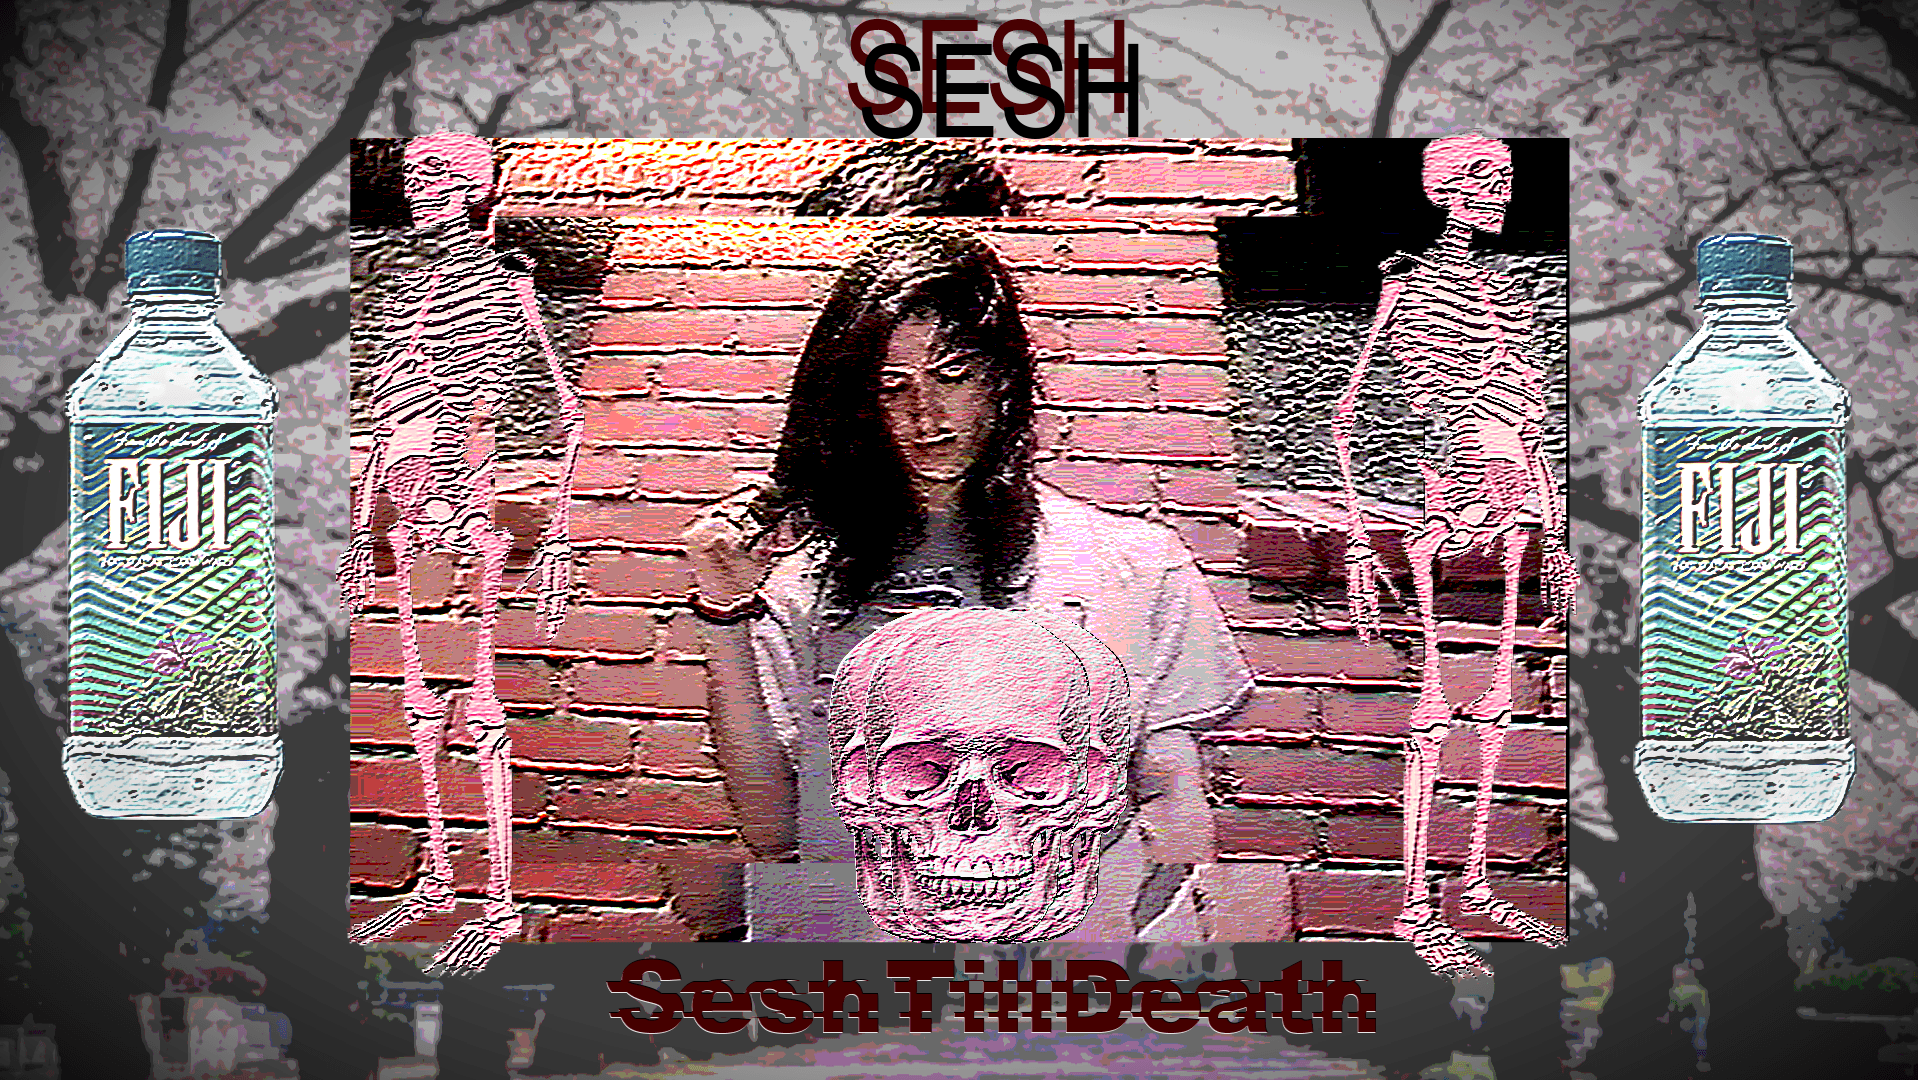 ART Another SESH Wallpaper I Made. Feedback Is Appreciated